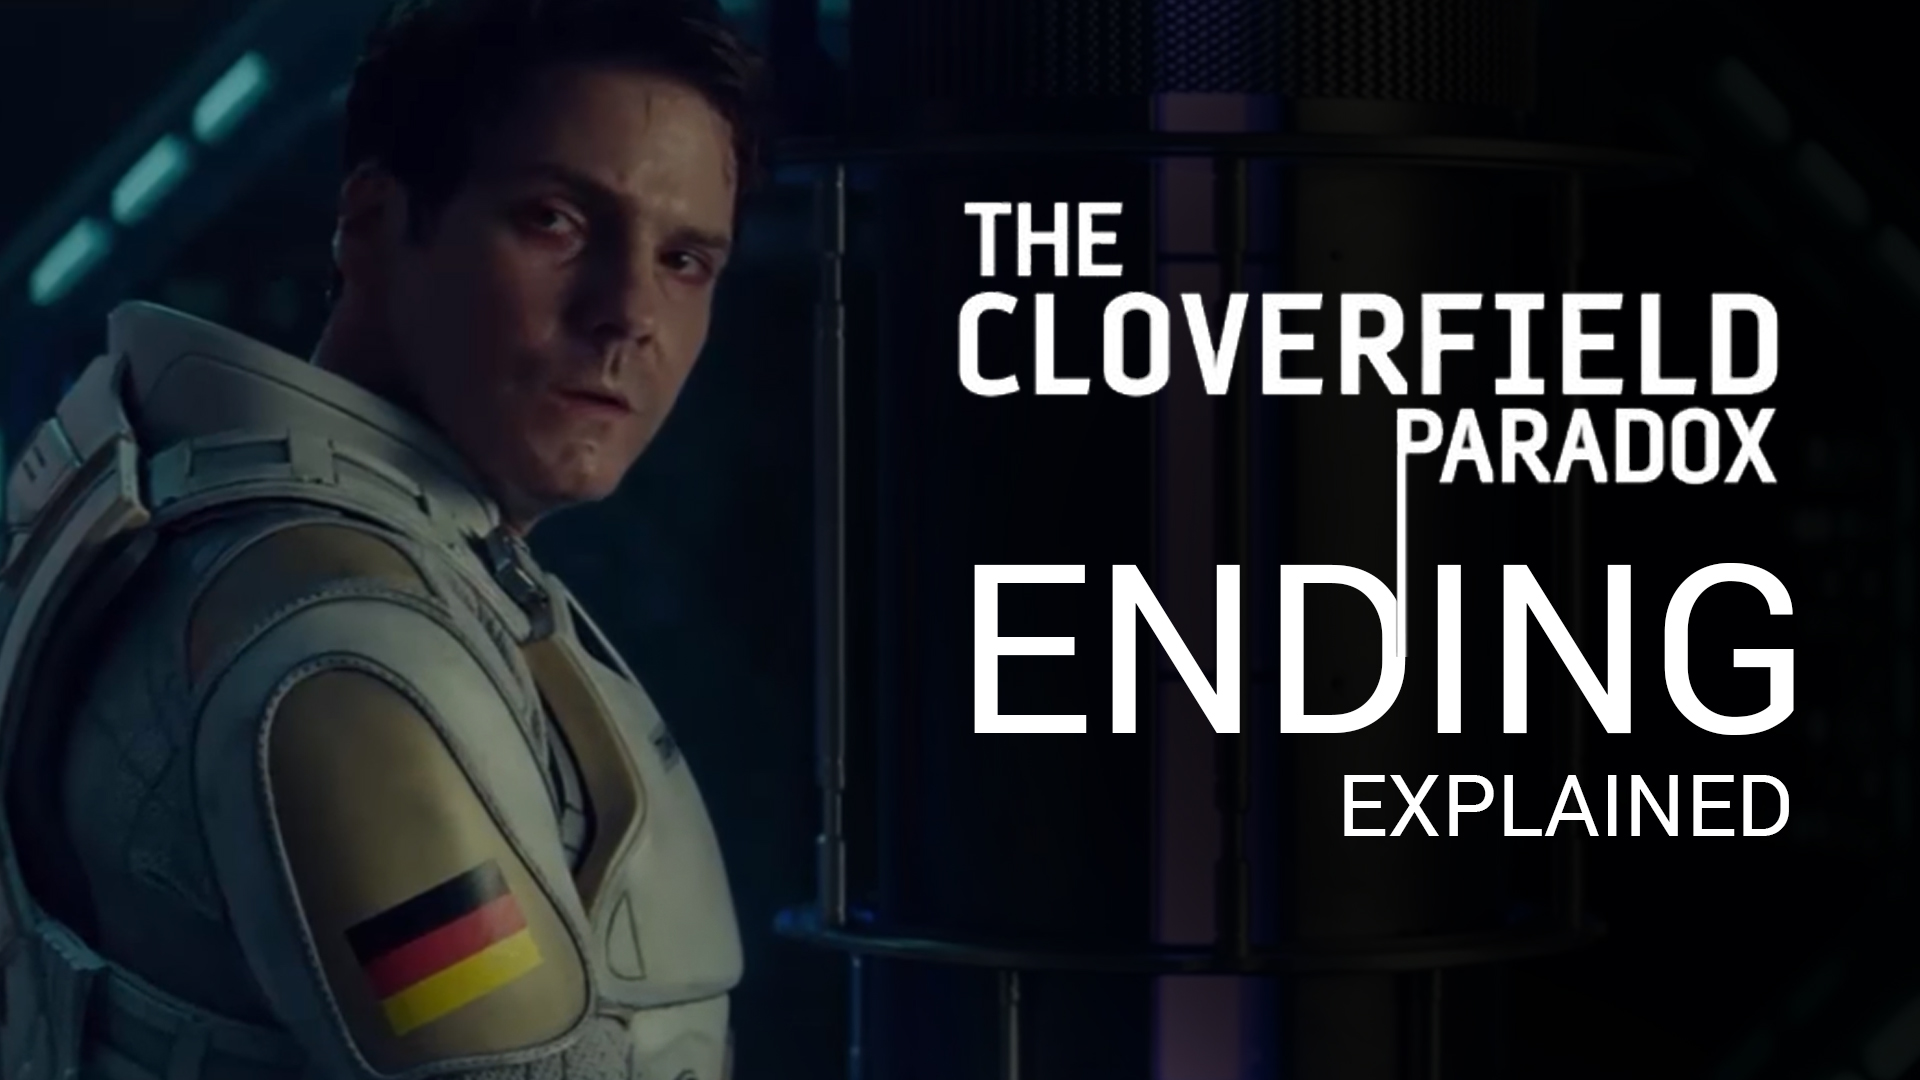 The Cloverfield Paradox Ending Explained A Multiverse of Monsters Full Spoilers